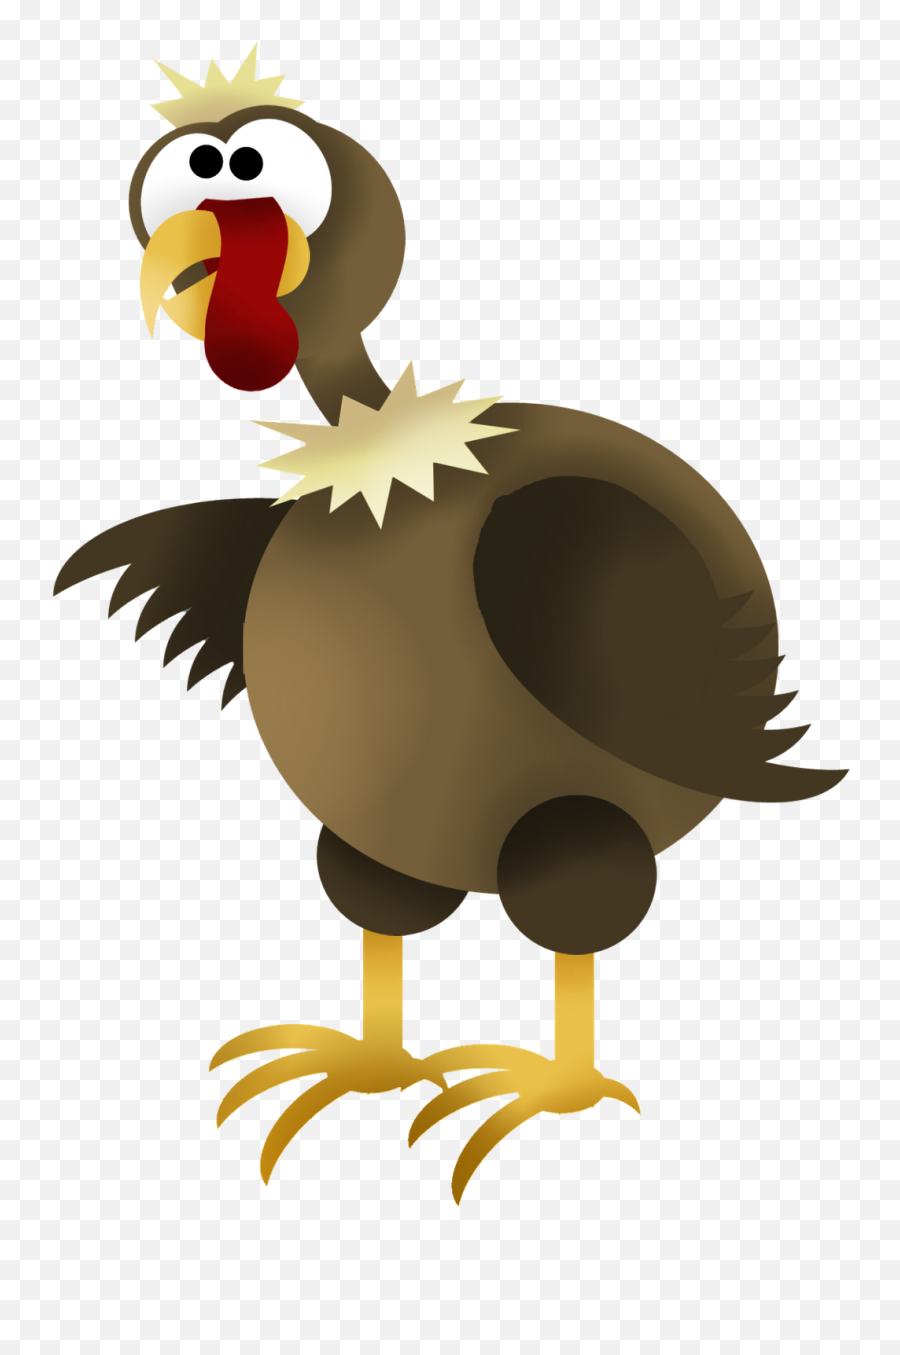 Hereu0027s The Plucked Turkey Clipart - Full Size Clipart Pin The Gobbler On The Turkey Emoji,Turkey Feathers Clipart